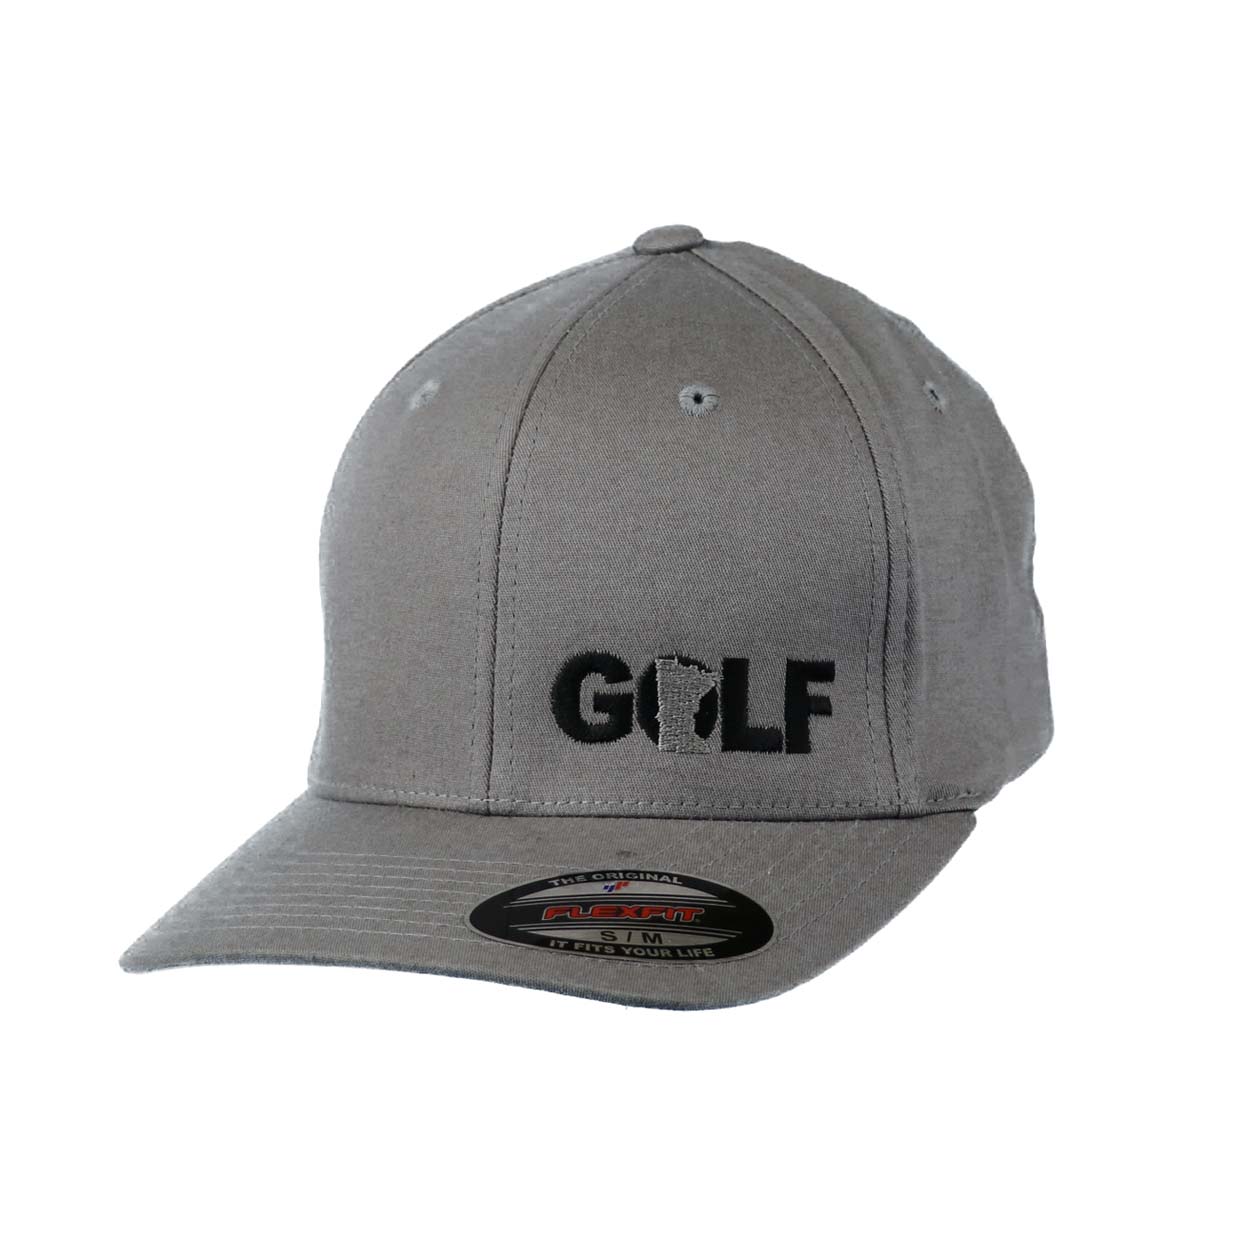 Golf Minnesota Night Out Pro Embroidered Flex Fit Trucker Hat Gray